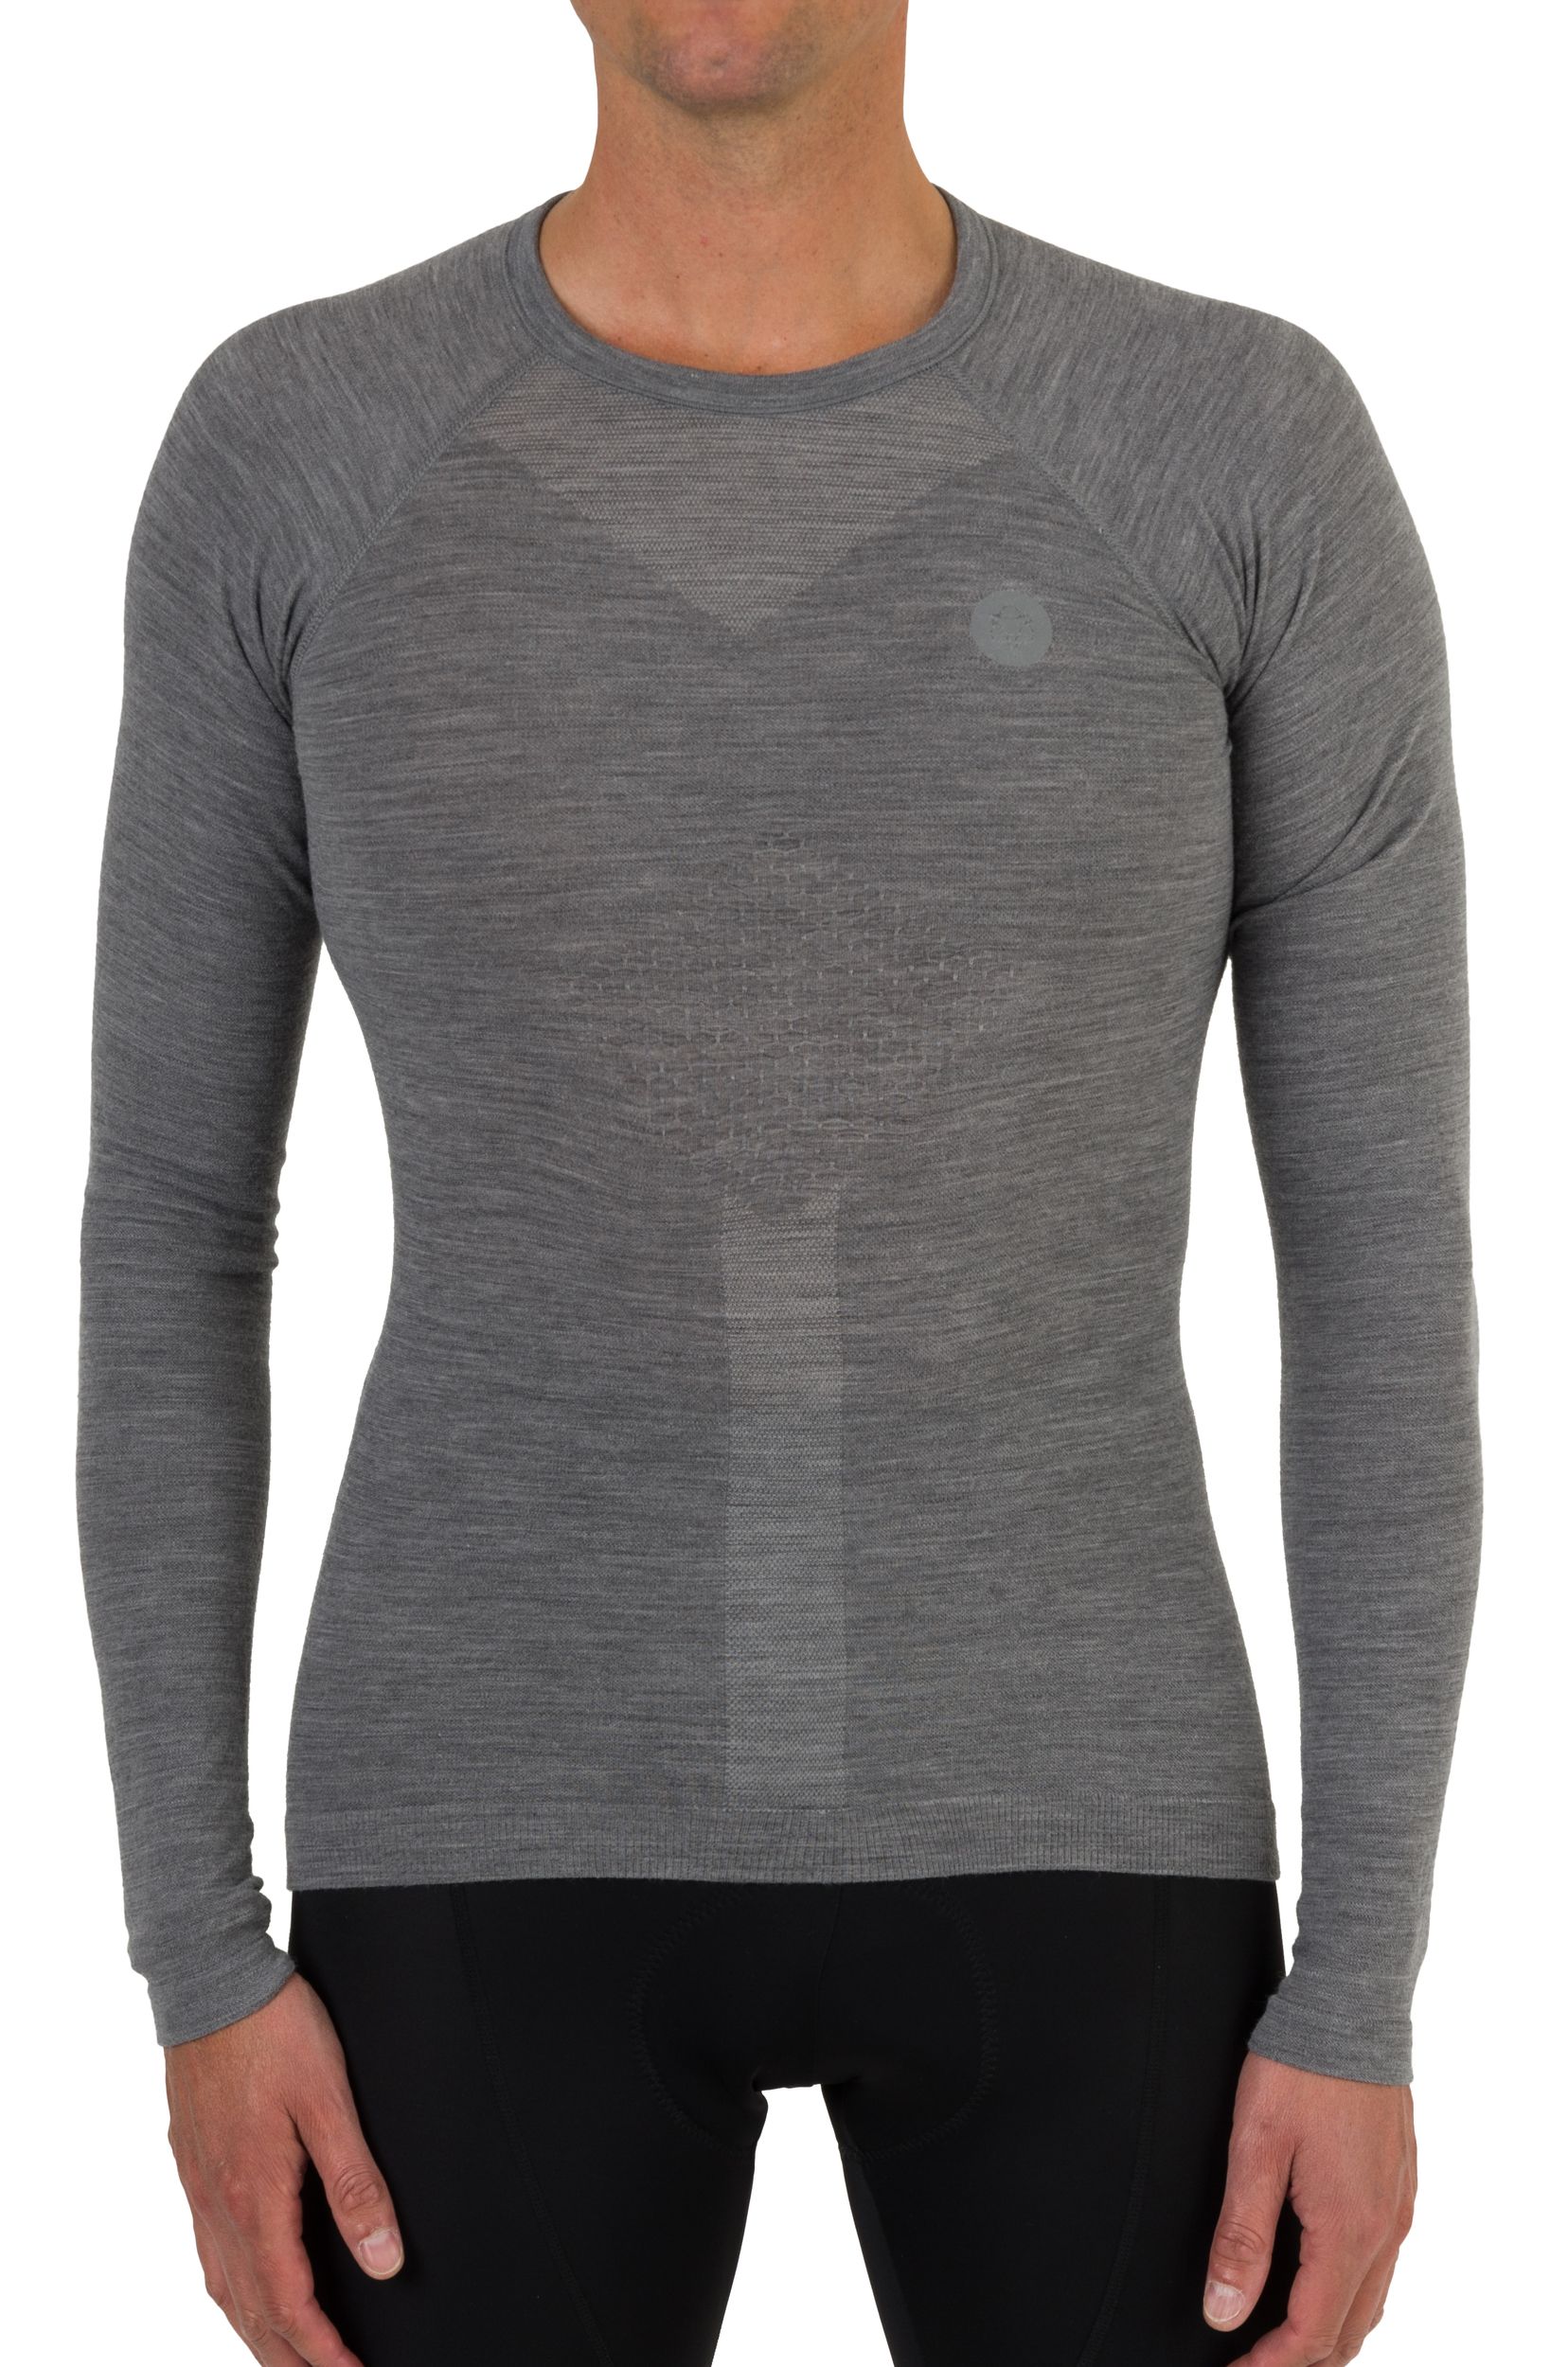 Winterday Merino Base Layer LS Essential fit example